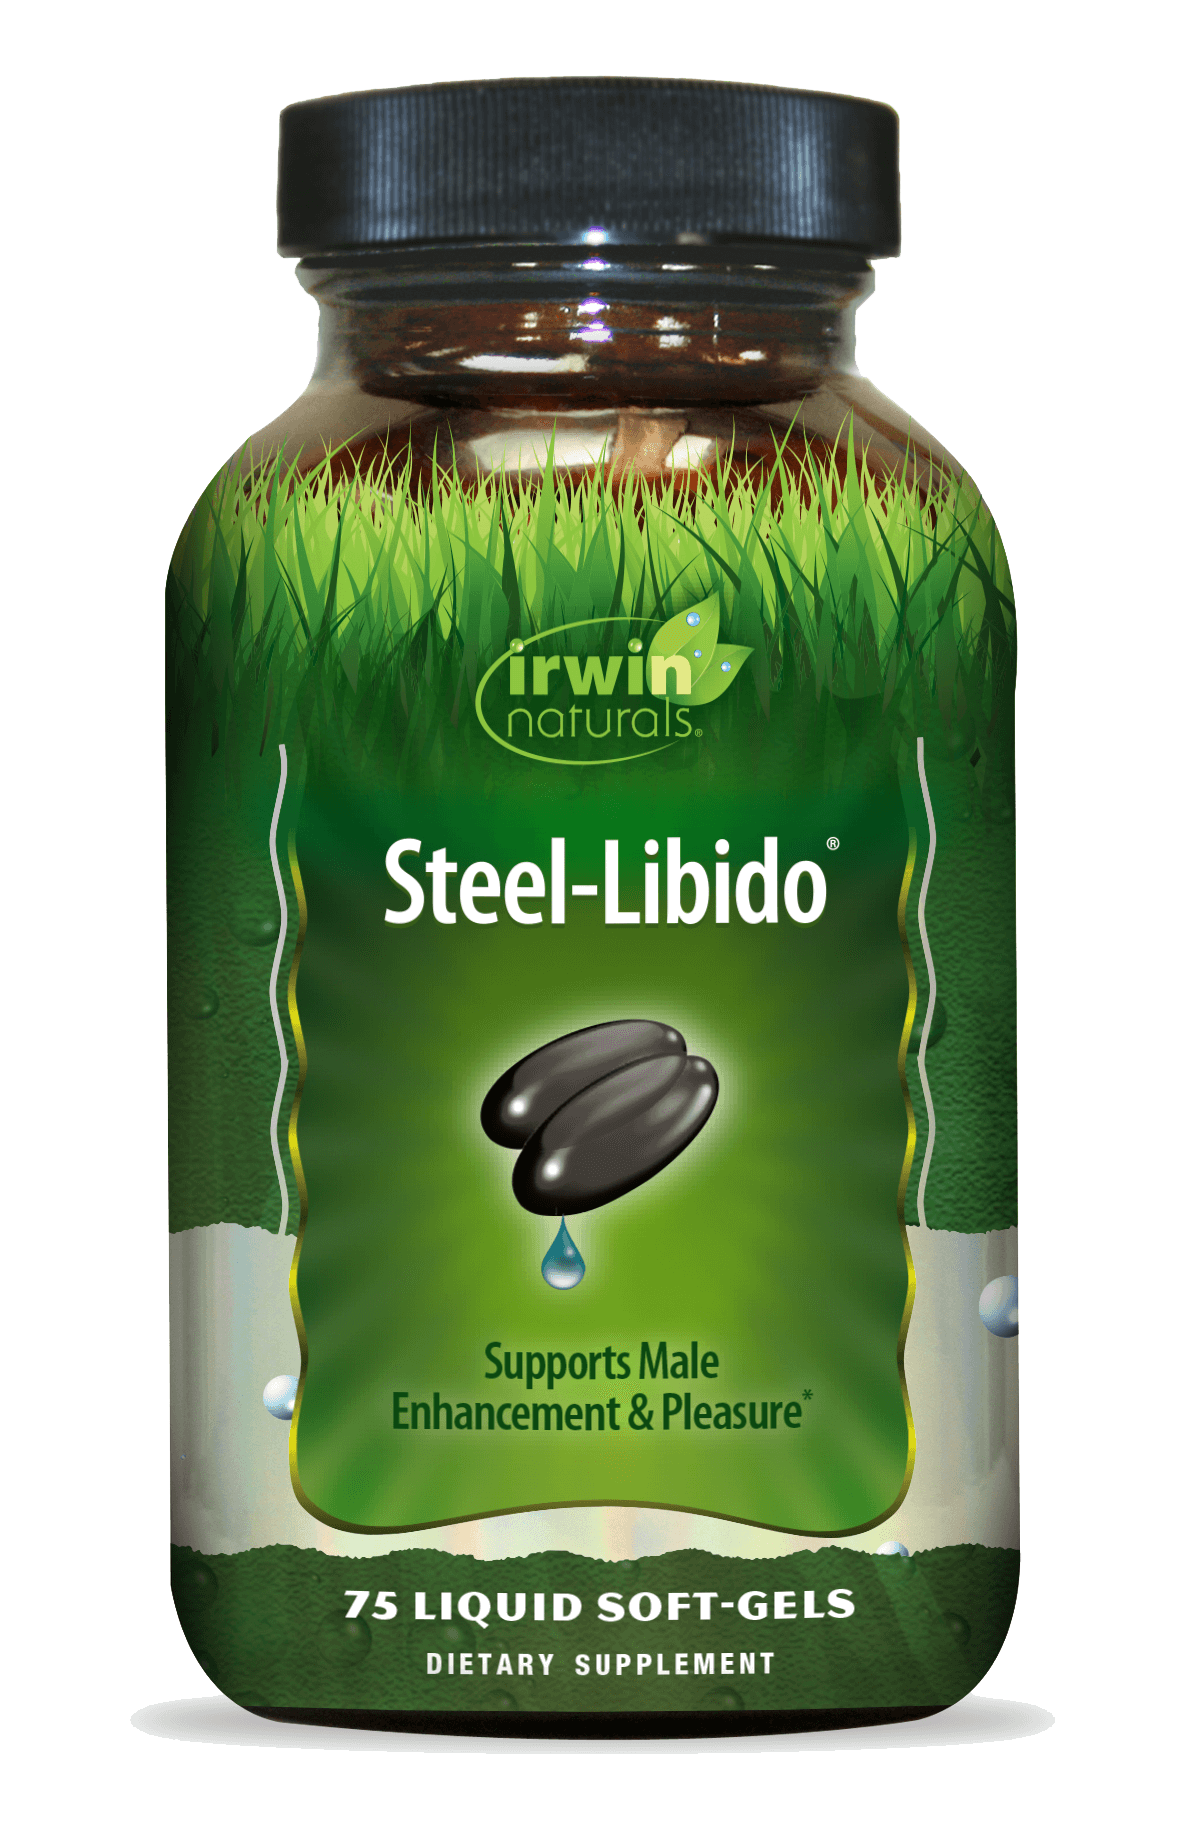 Steel Libido Supports Enhancement and Pleasure by Irwin Naturals